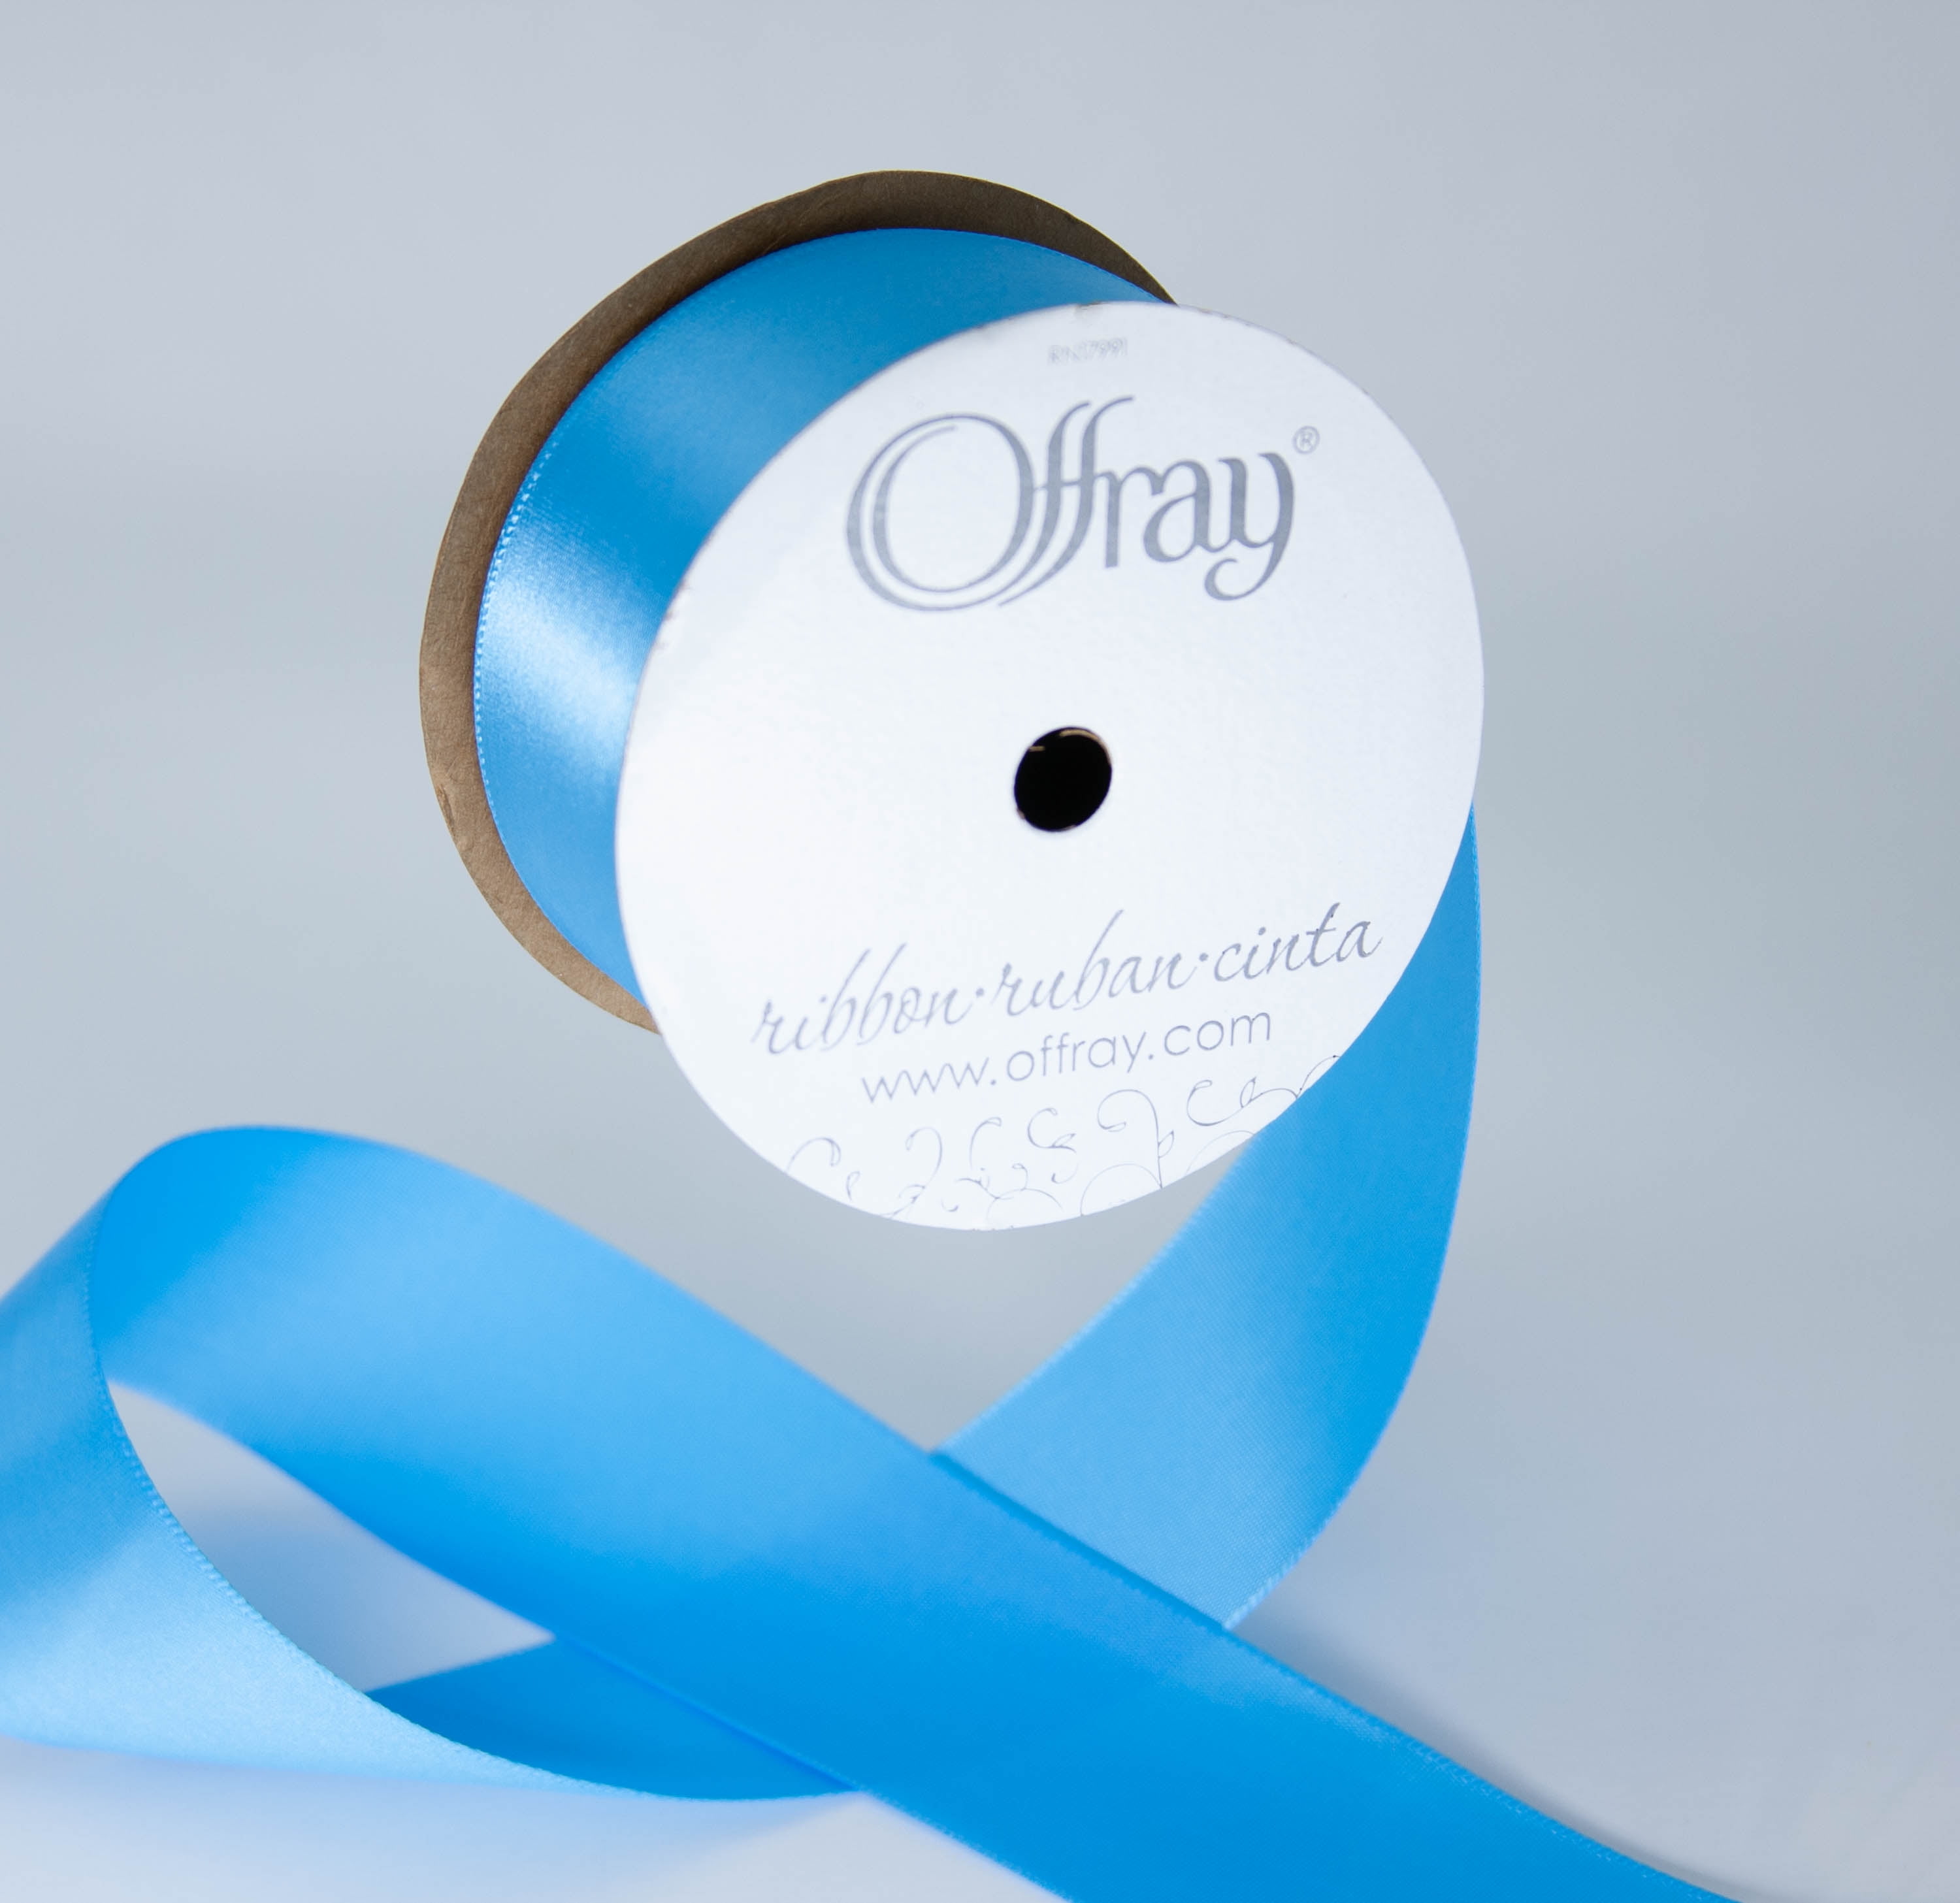 Blue Ribbon, Offray Royal Blue Satin Ribbon 1 1/2 Inches Wide X 10 Yards,  Single-face, SECOND QUALITY FLAWED, 1230 